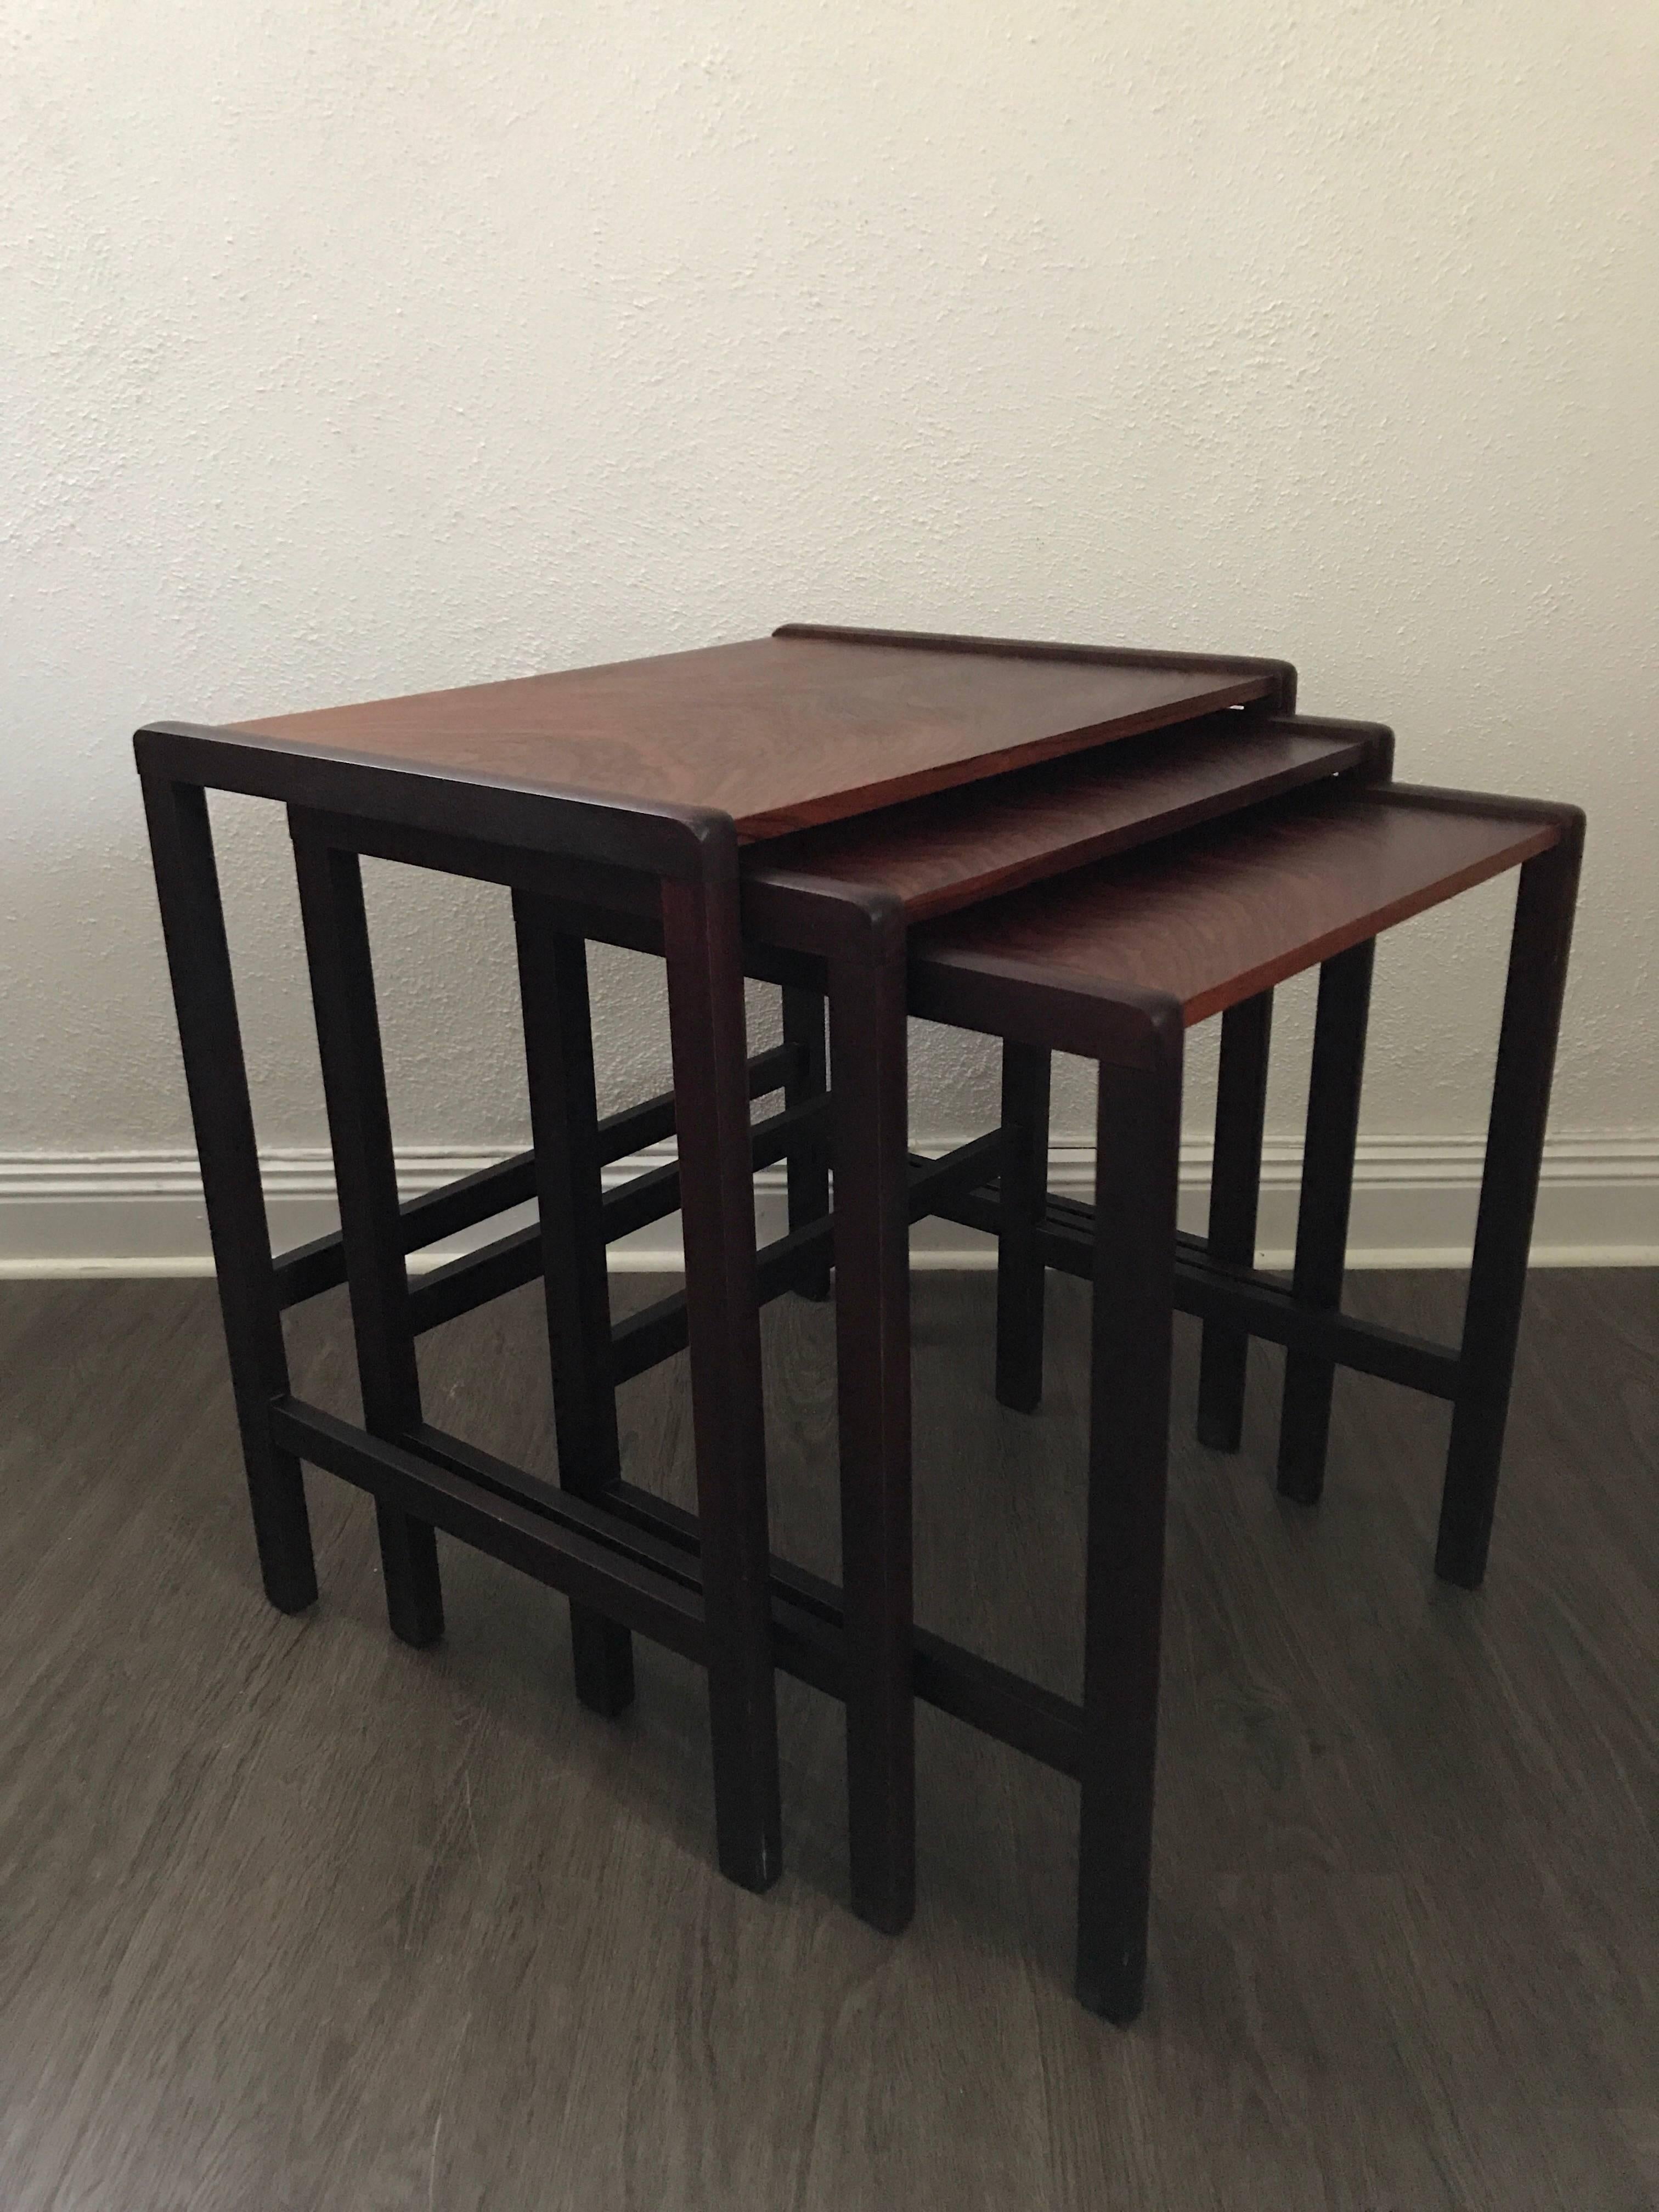 Three Swedish 1950 rosewood nesting tables.
Very nice three piece set nesting tables made out of rosewood in the 1950s. The tables are in a super condition without any bigger marks or dents.
The largest table measure 49 cm wide, 37 cm deep and 50